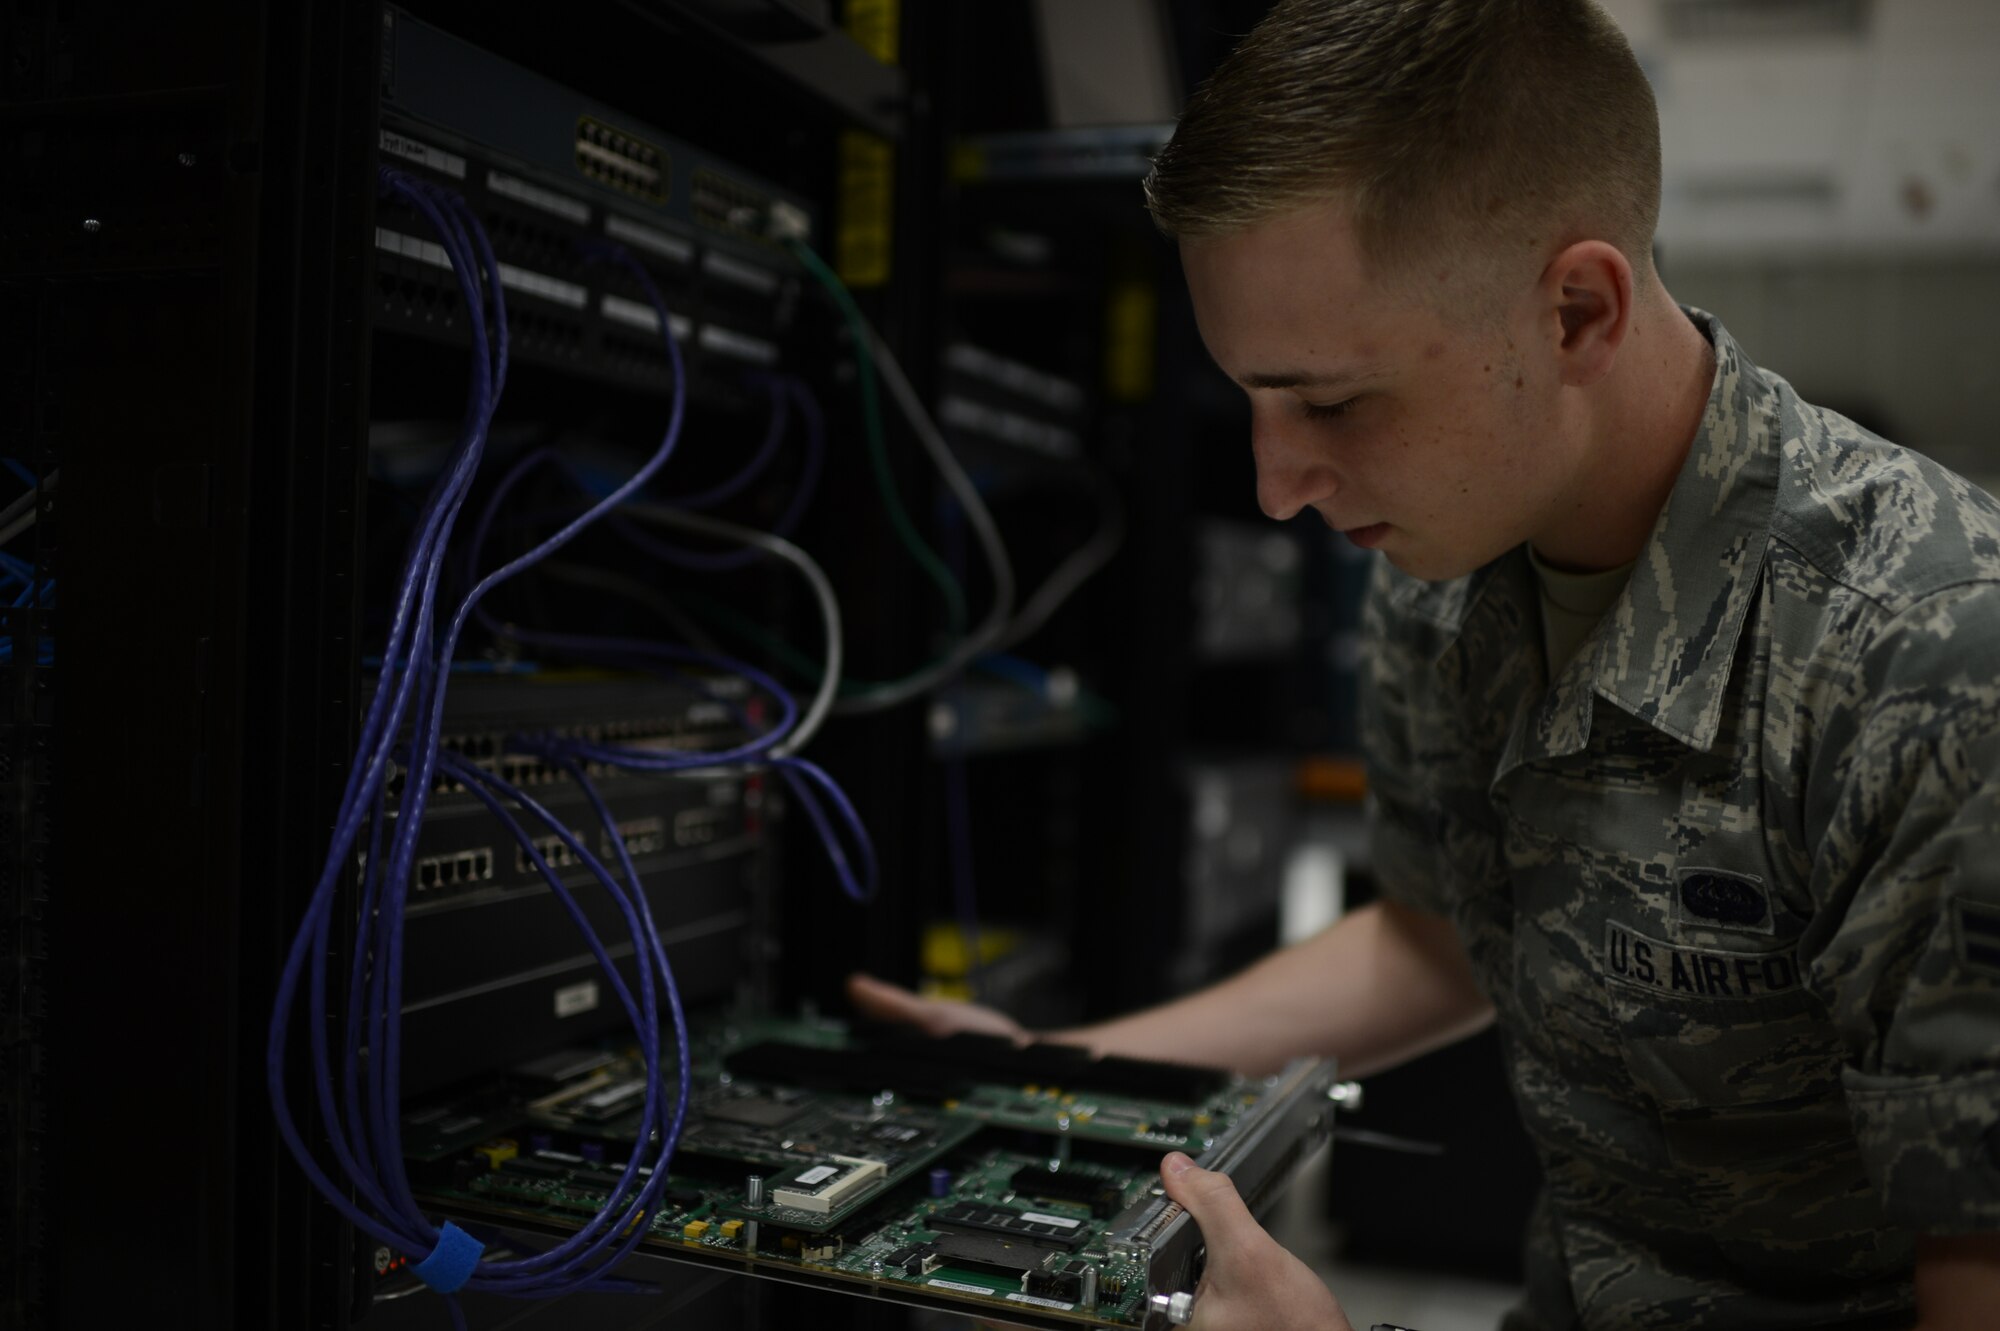 U.S. Air Force Airman 1st Class Zachery Cook, 52nd Communications Squadron cyber system operations technician from Cleveland, removes a computer component from a training lab at Spangdahlem Air Base, Germany, June 10, 2014. Airmen use the training lab to conduct training and tests on a stand-alone network, so any training errors will not affect Spangdahlem’s live network. (U.S. Air Force photo by Senior Airman Gustavo Castillo/Released)